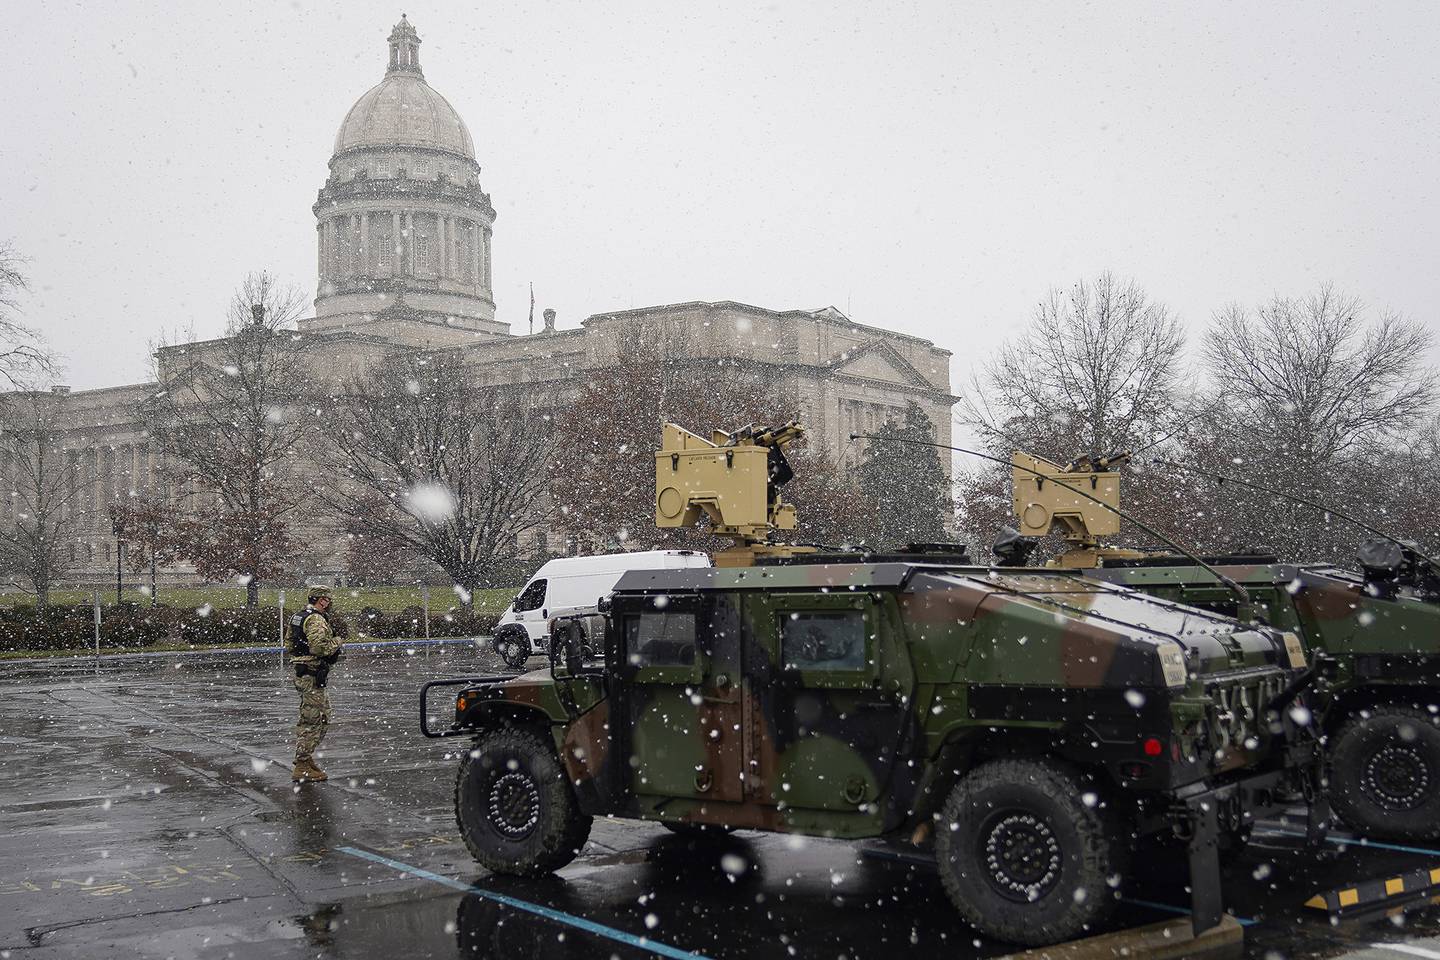 A National Guard soldier stands outside the Capitol building in Frankfort, Ky., Sunday, Jan. 17, 2021.